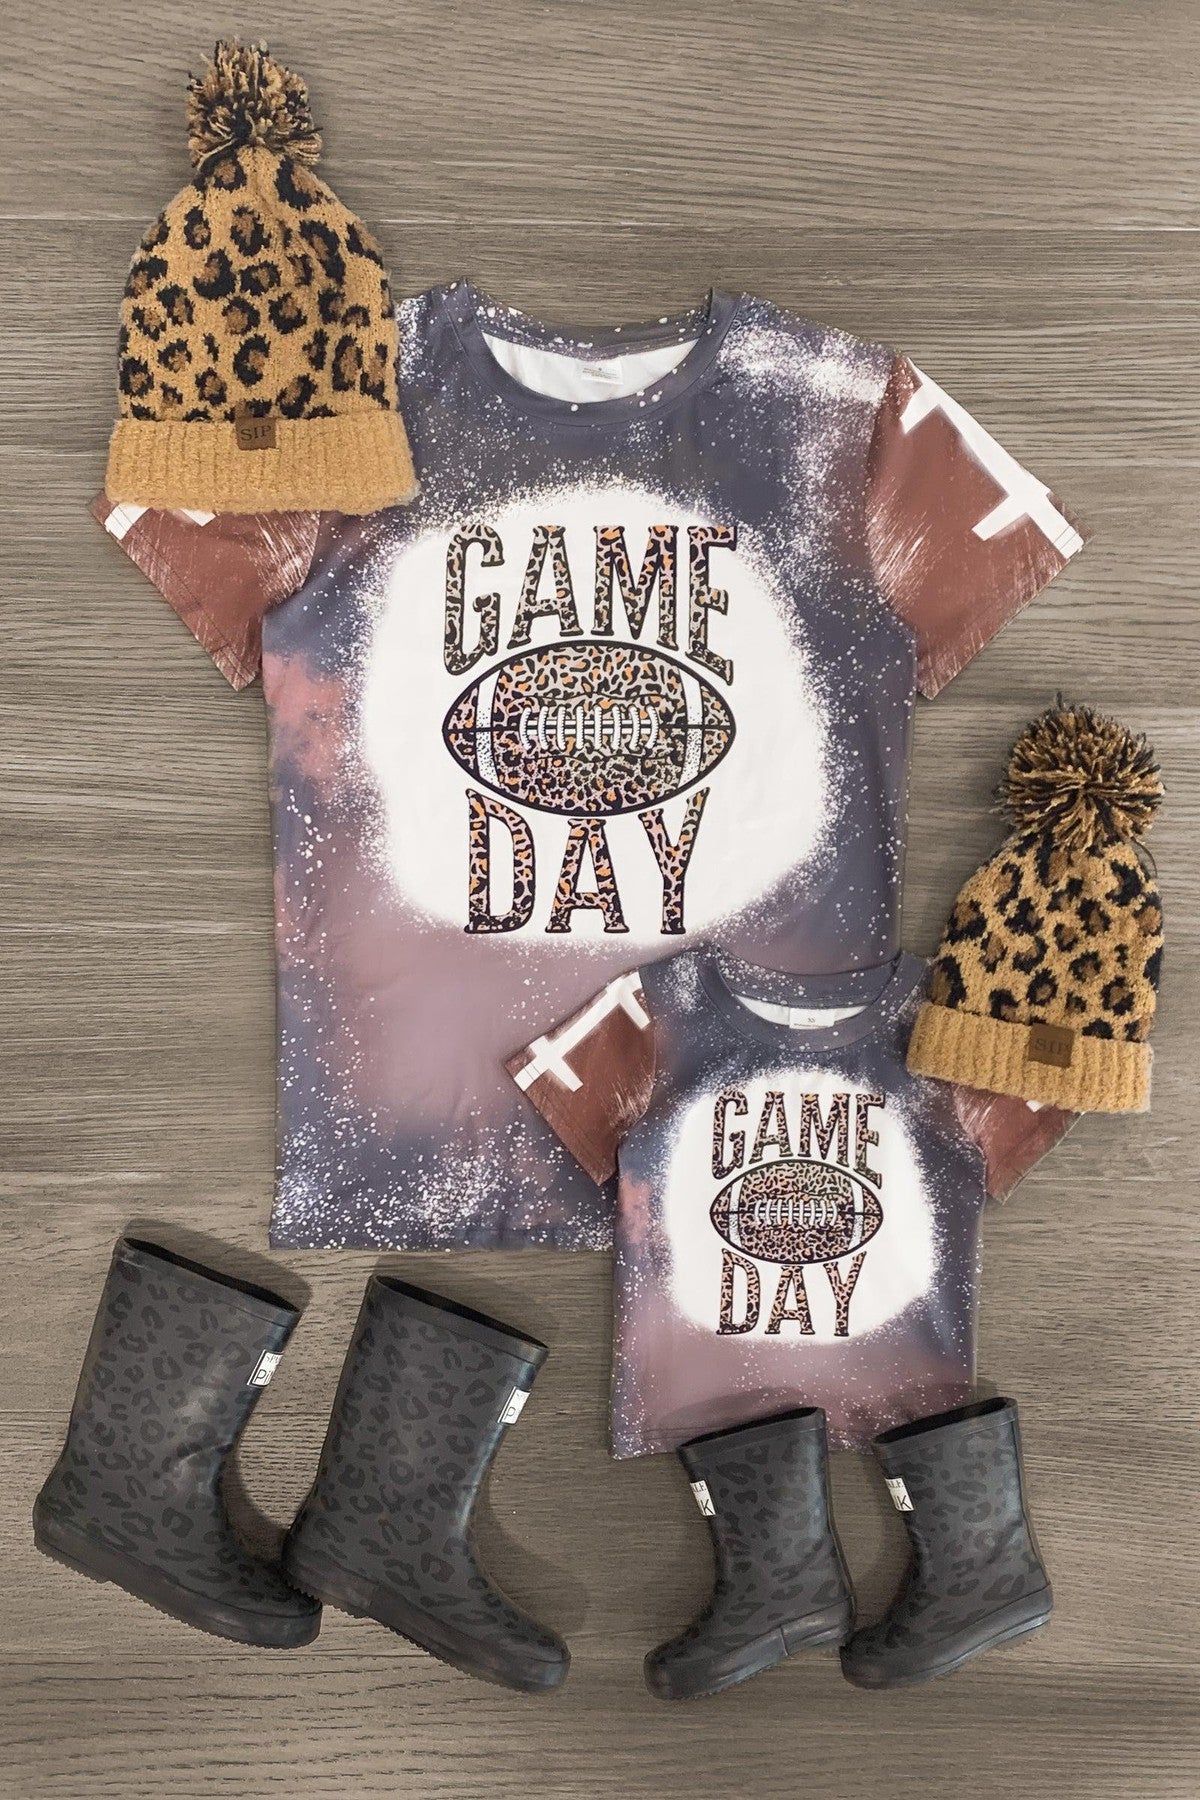 Mom & Me - "Game Day" Football Top - Sparkle in Pink